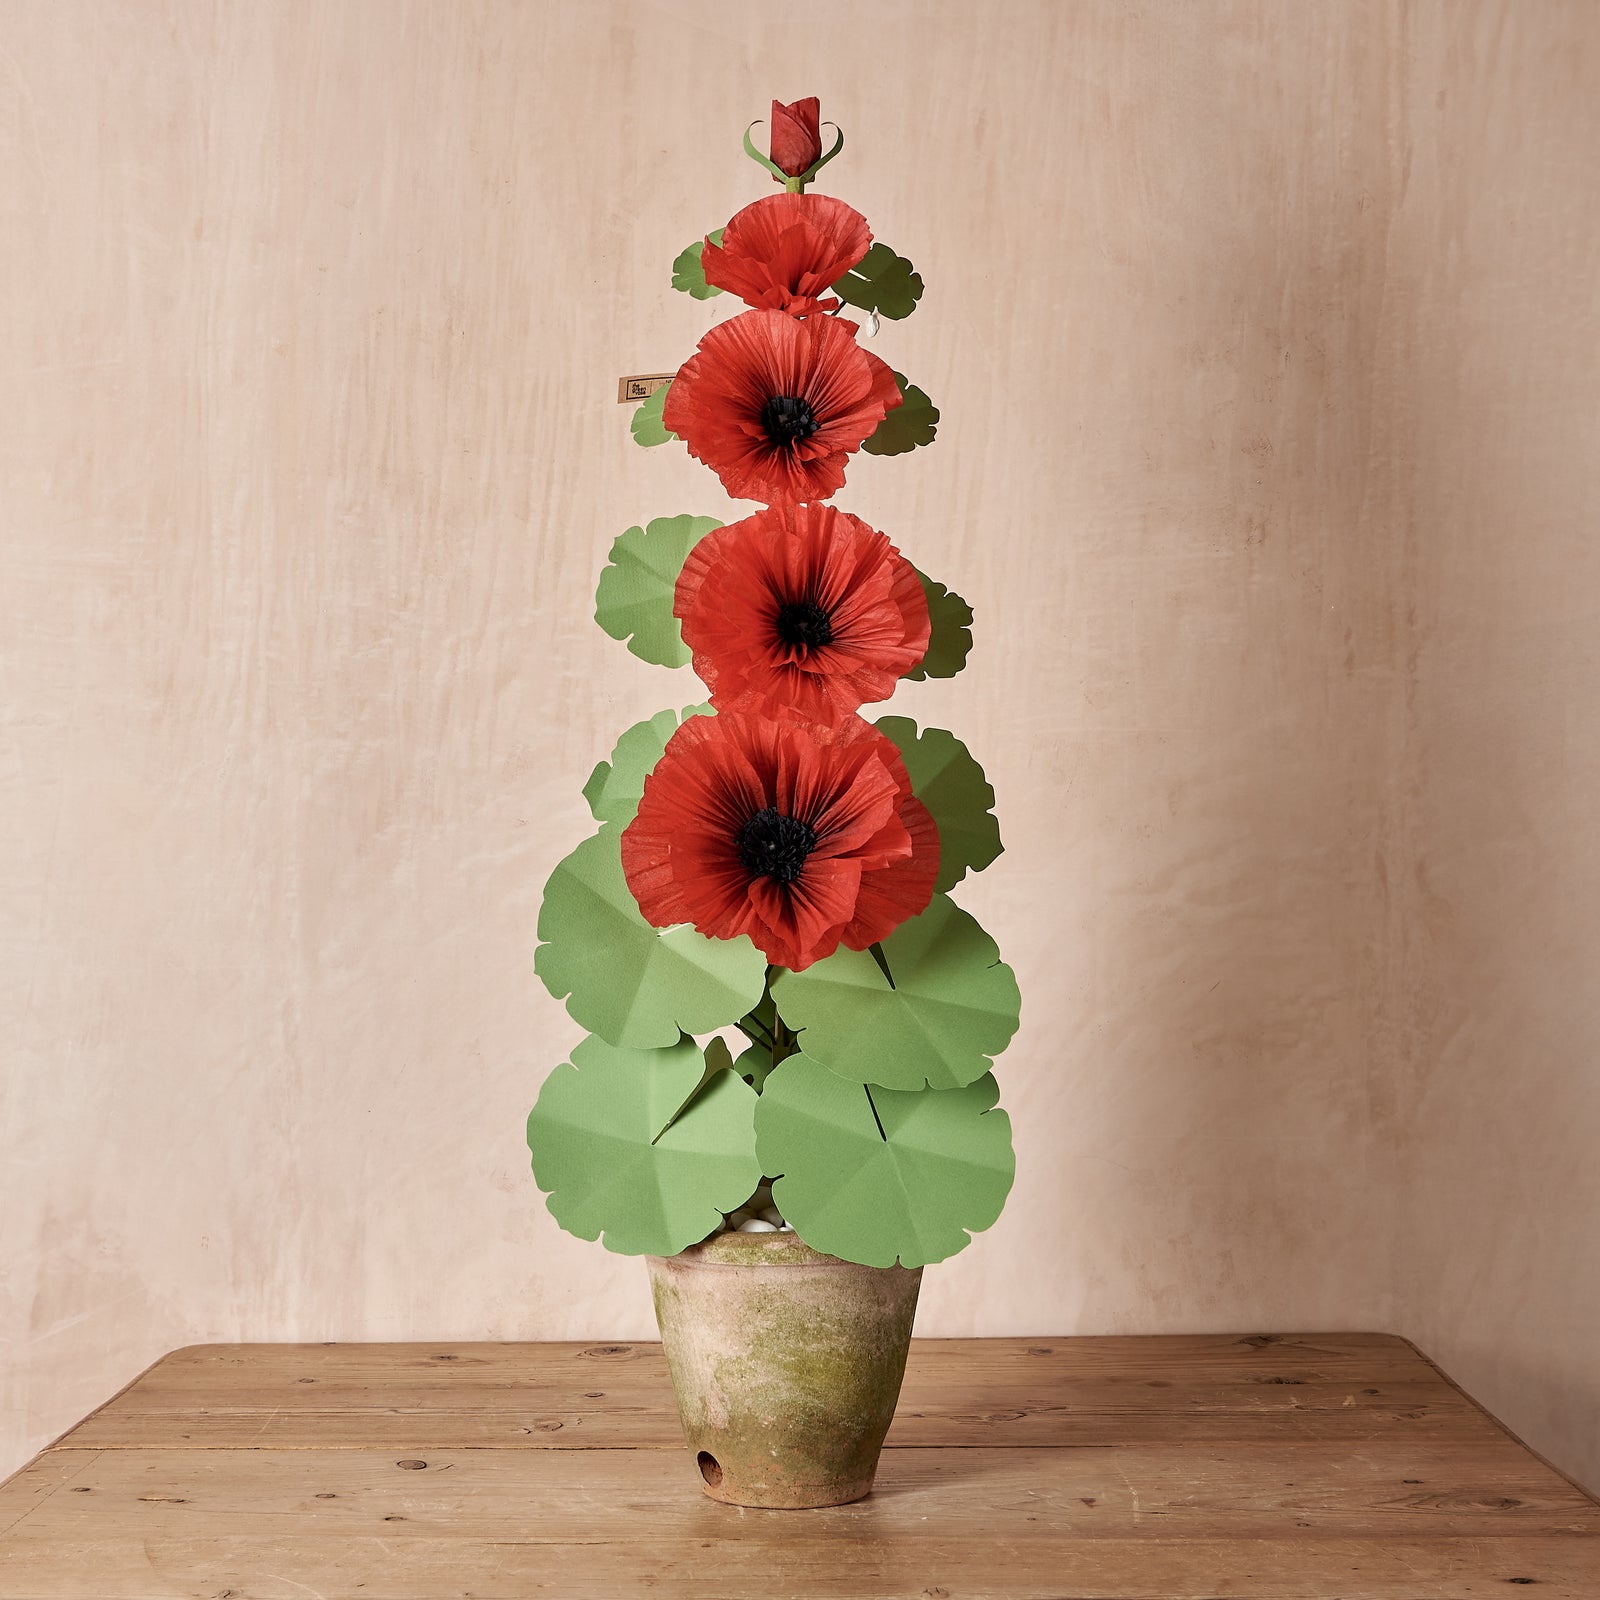 Red Hollyhock Plant with Black Center (5 Bloom)